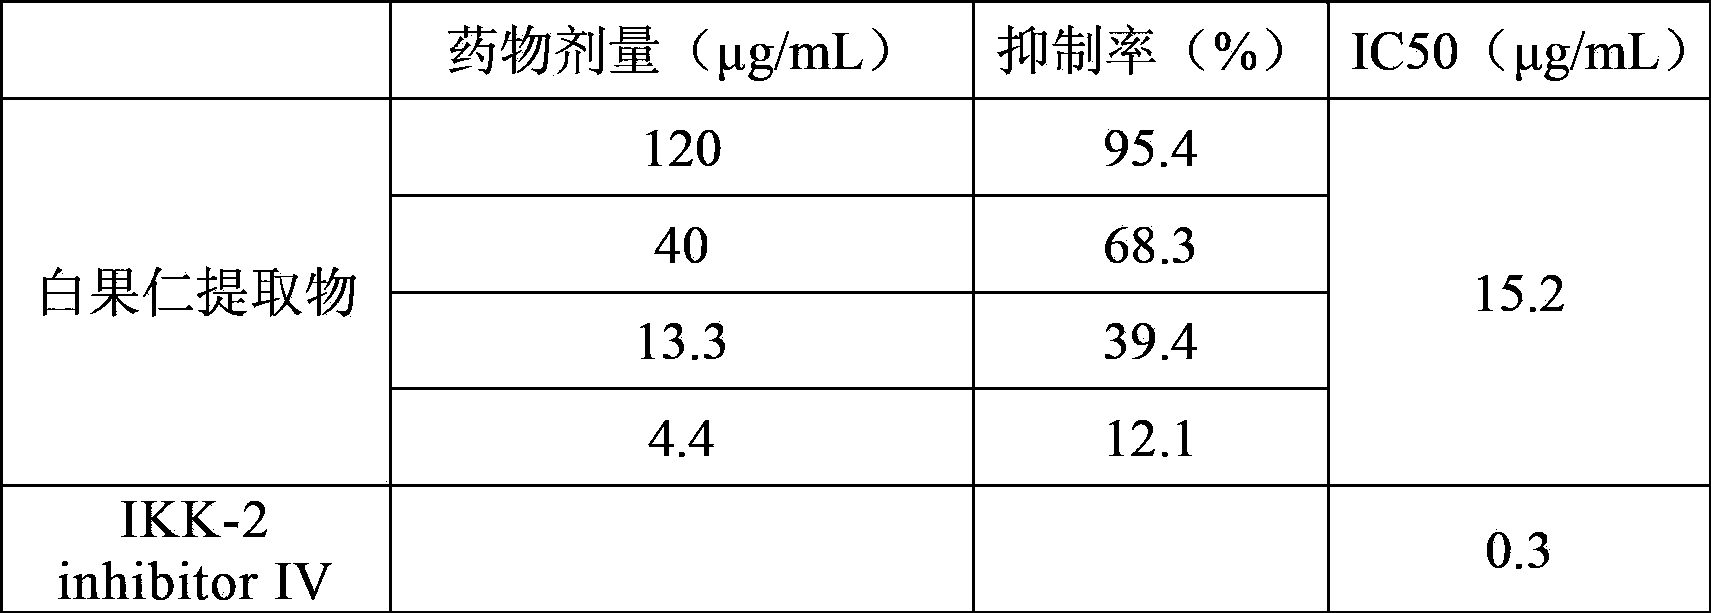 Application of ginkgo seed extract